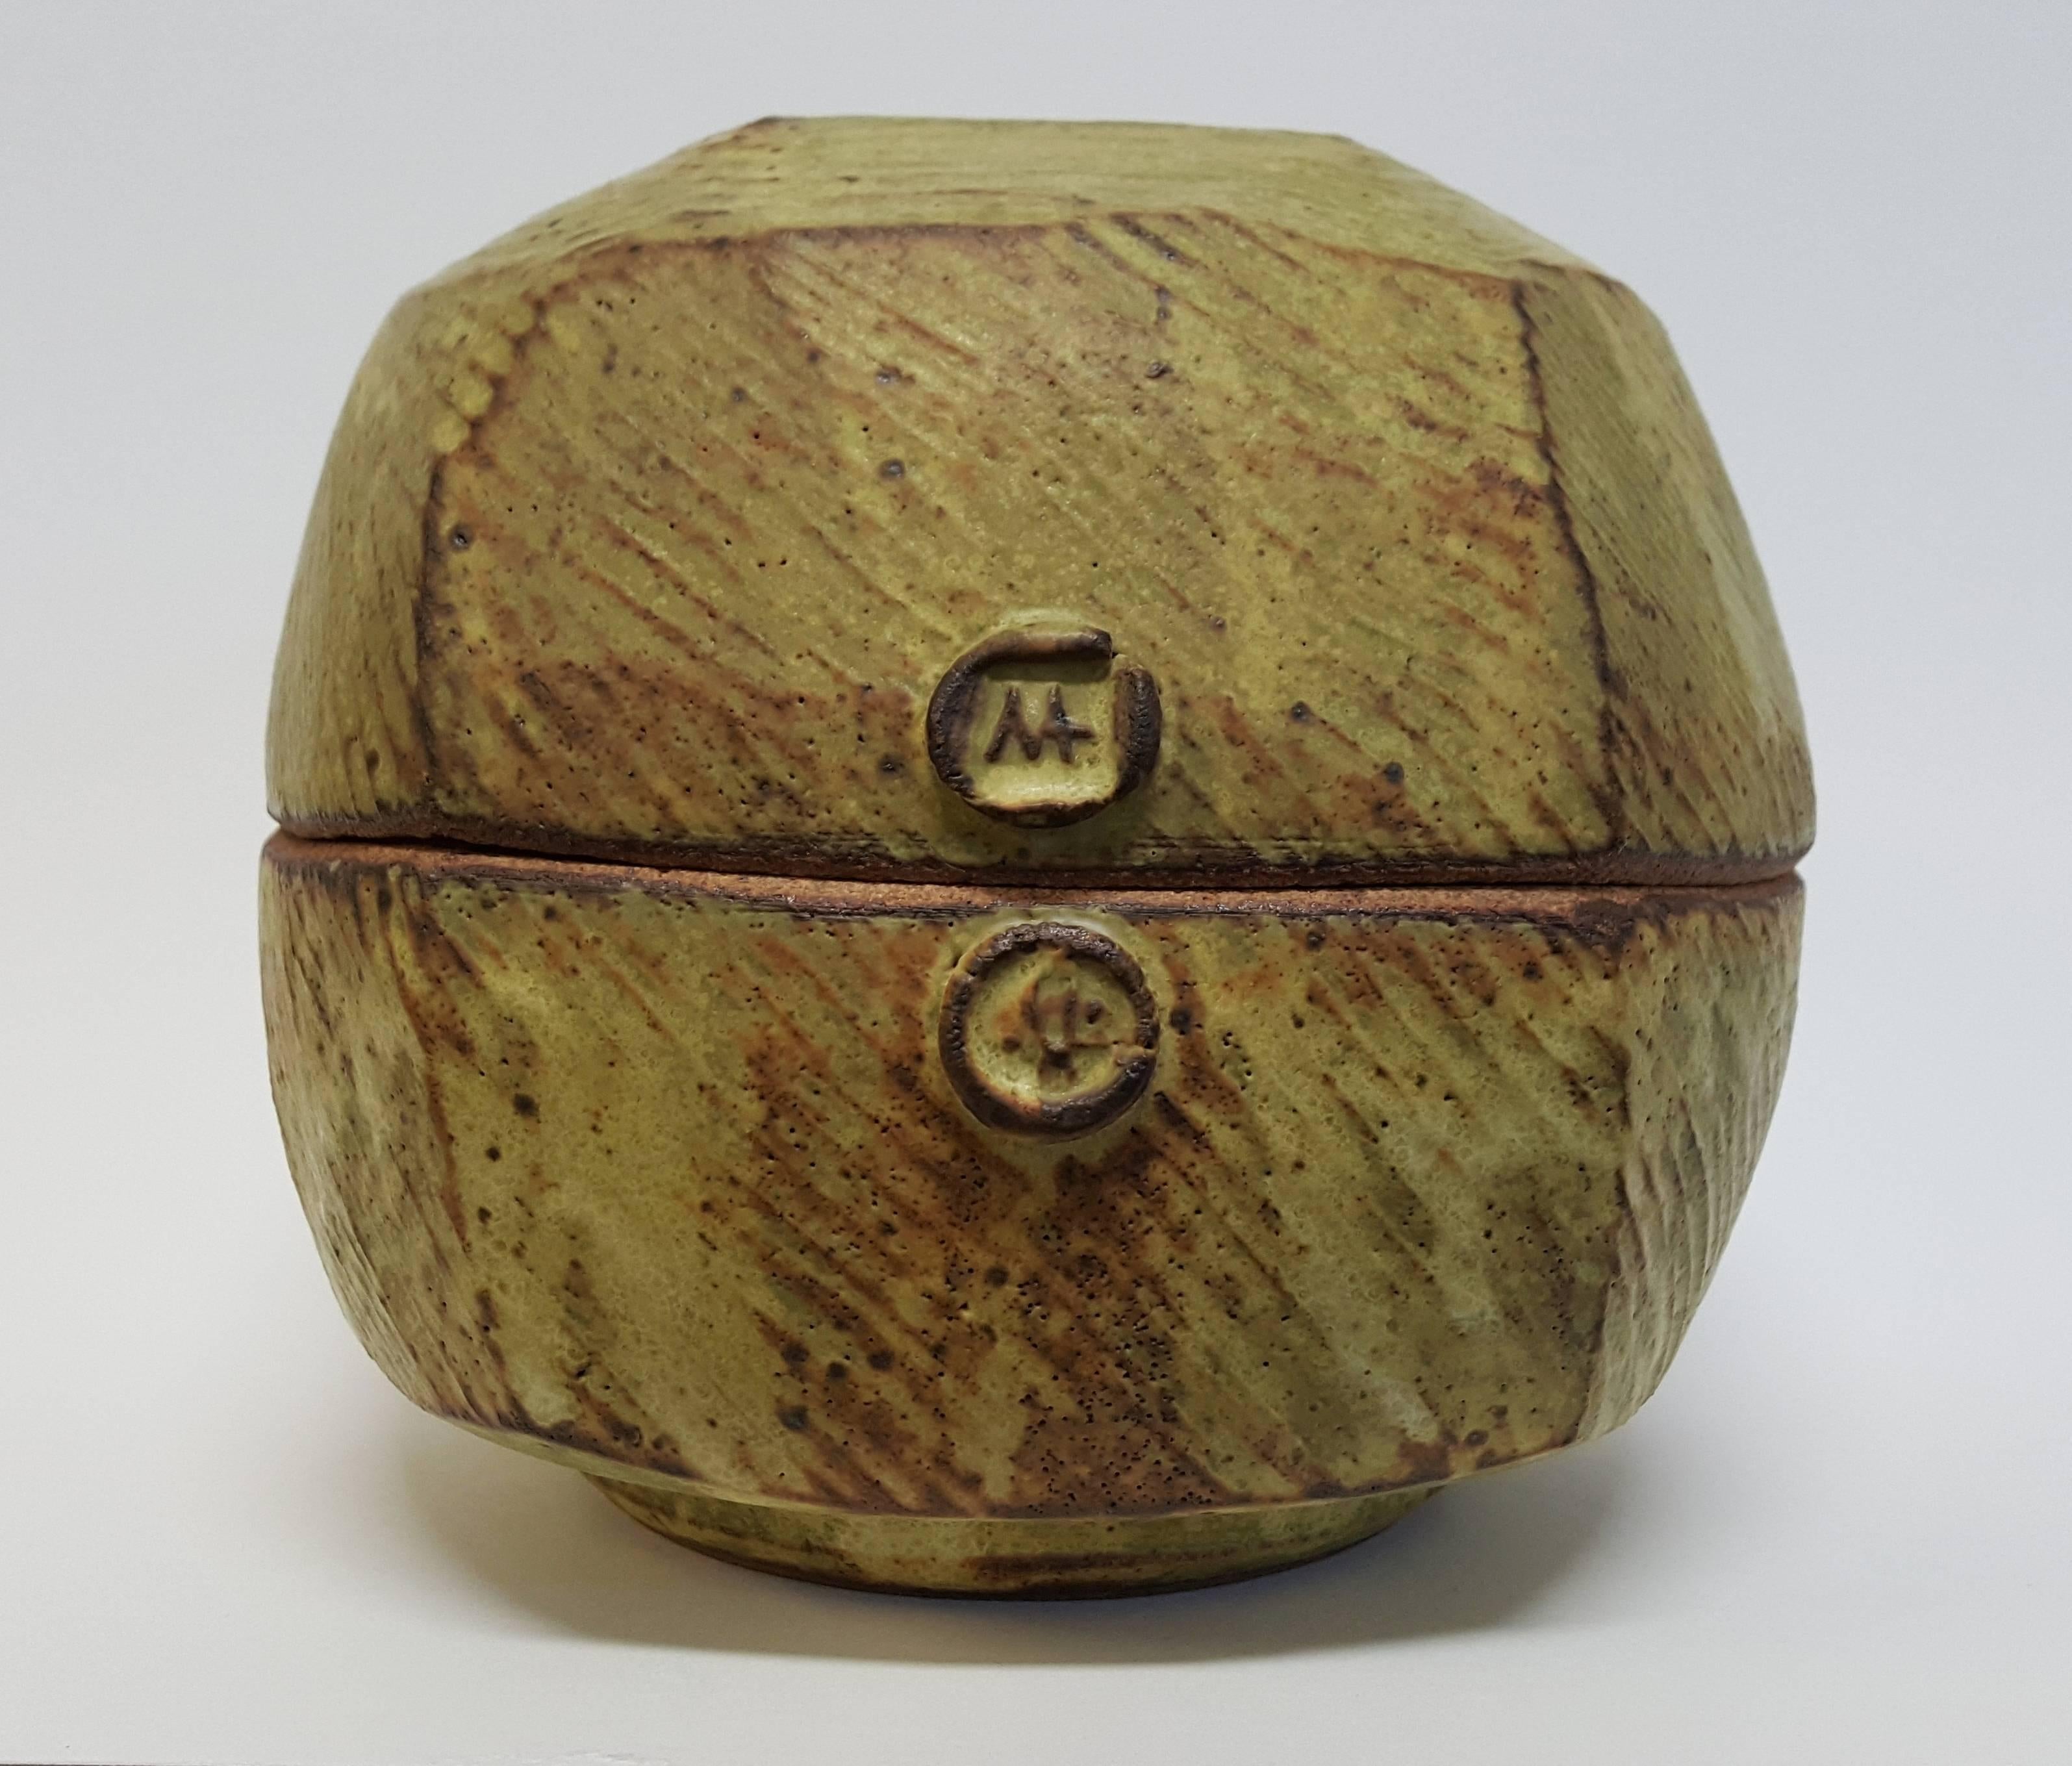 Warren Mackenzie (born 1924)
Five-sided button box, n.d.
Stoneware
Measures: 6 x 7 x 7 inches


MacKenzie's defining moment leading to his life's work began while he was a student at The Art Institute of Chicago when he came across a simple